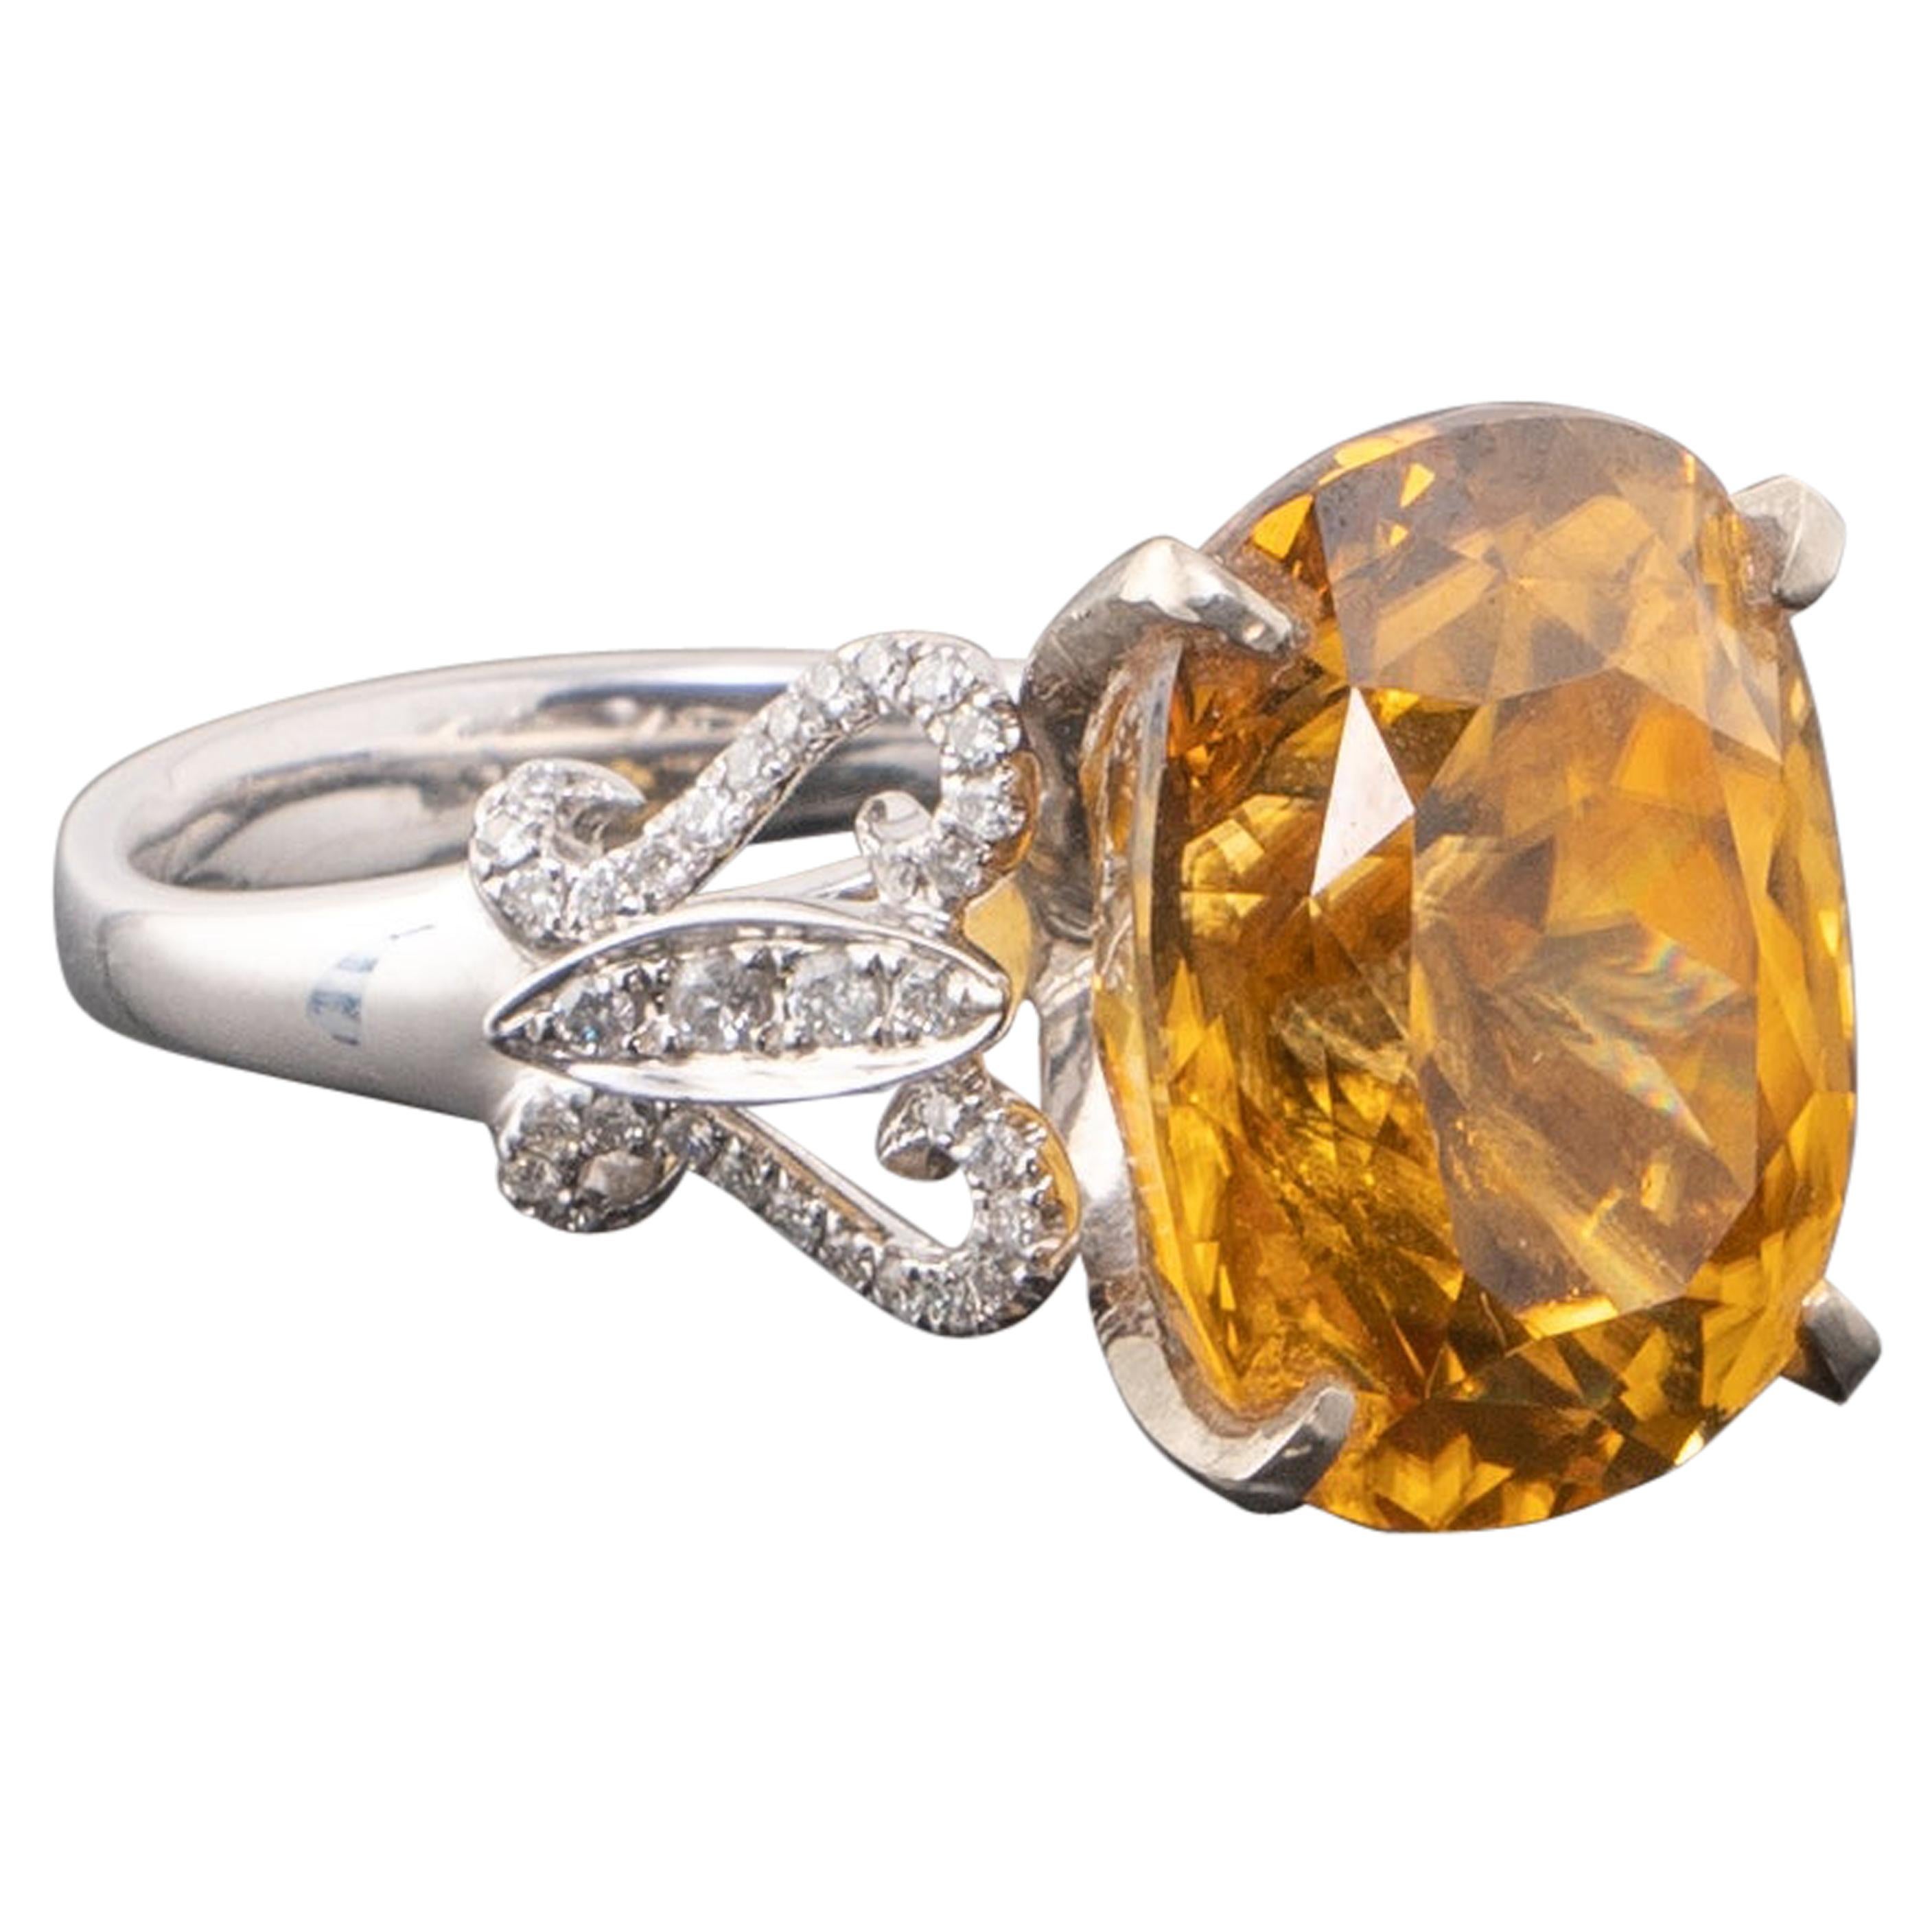 Certified 20.38 Carat Natural Yellow Zircon and Diamond Cocktail Ring